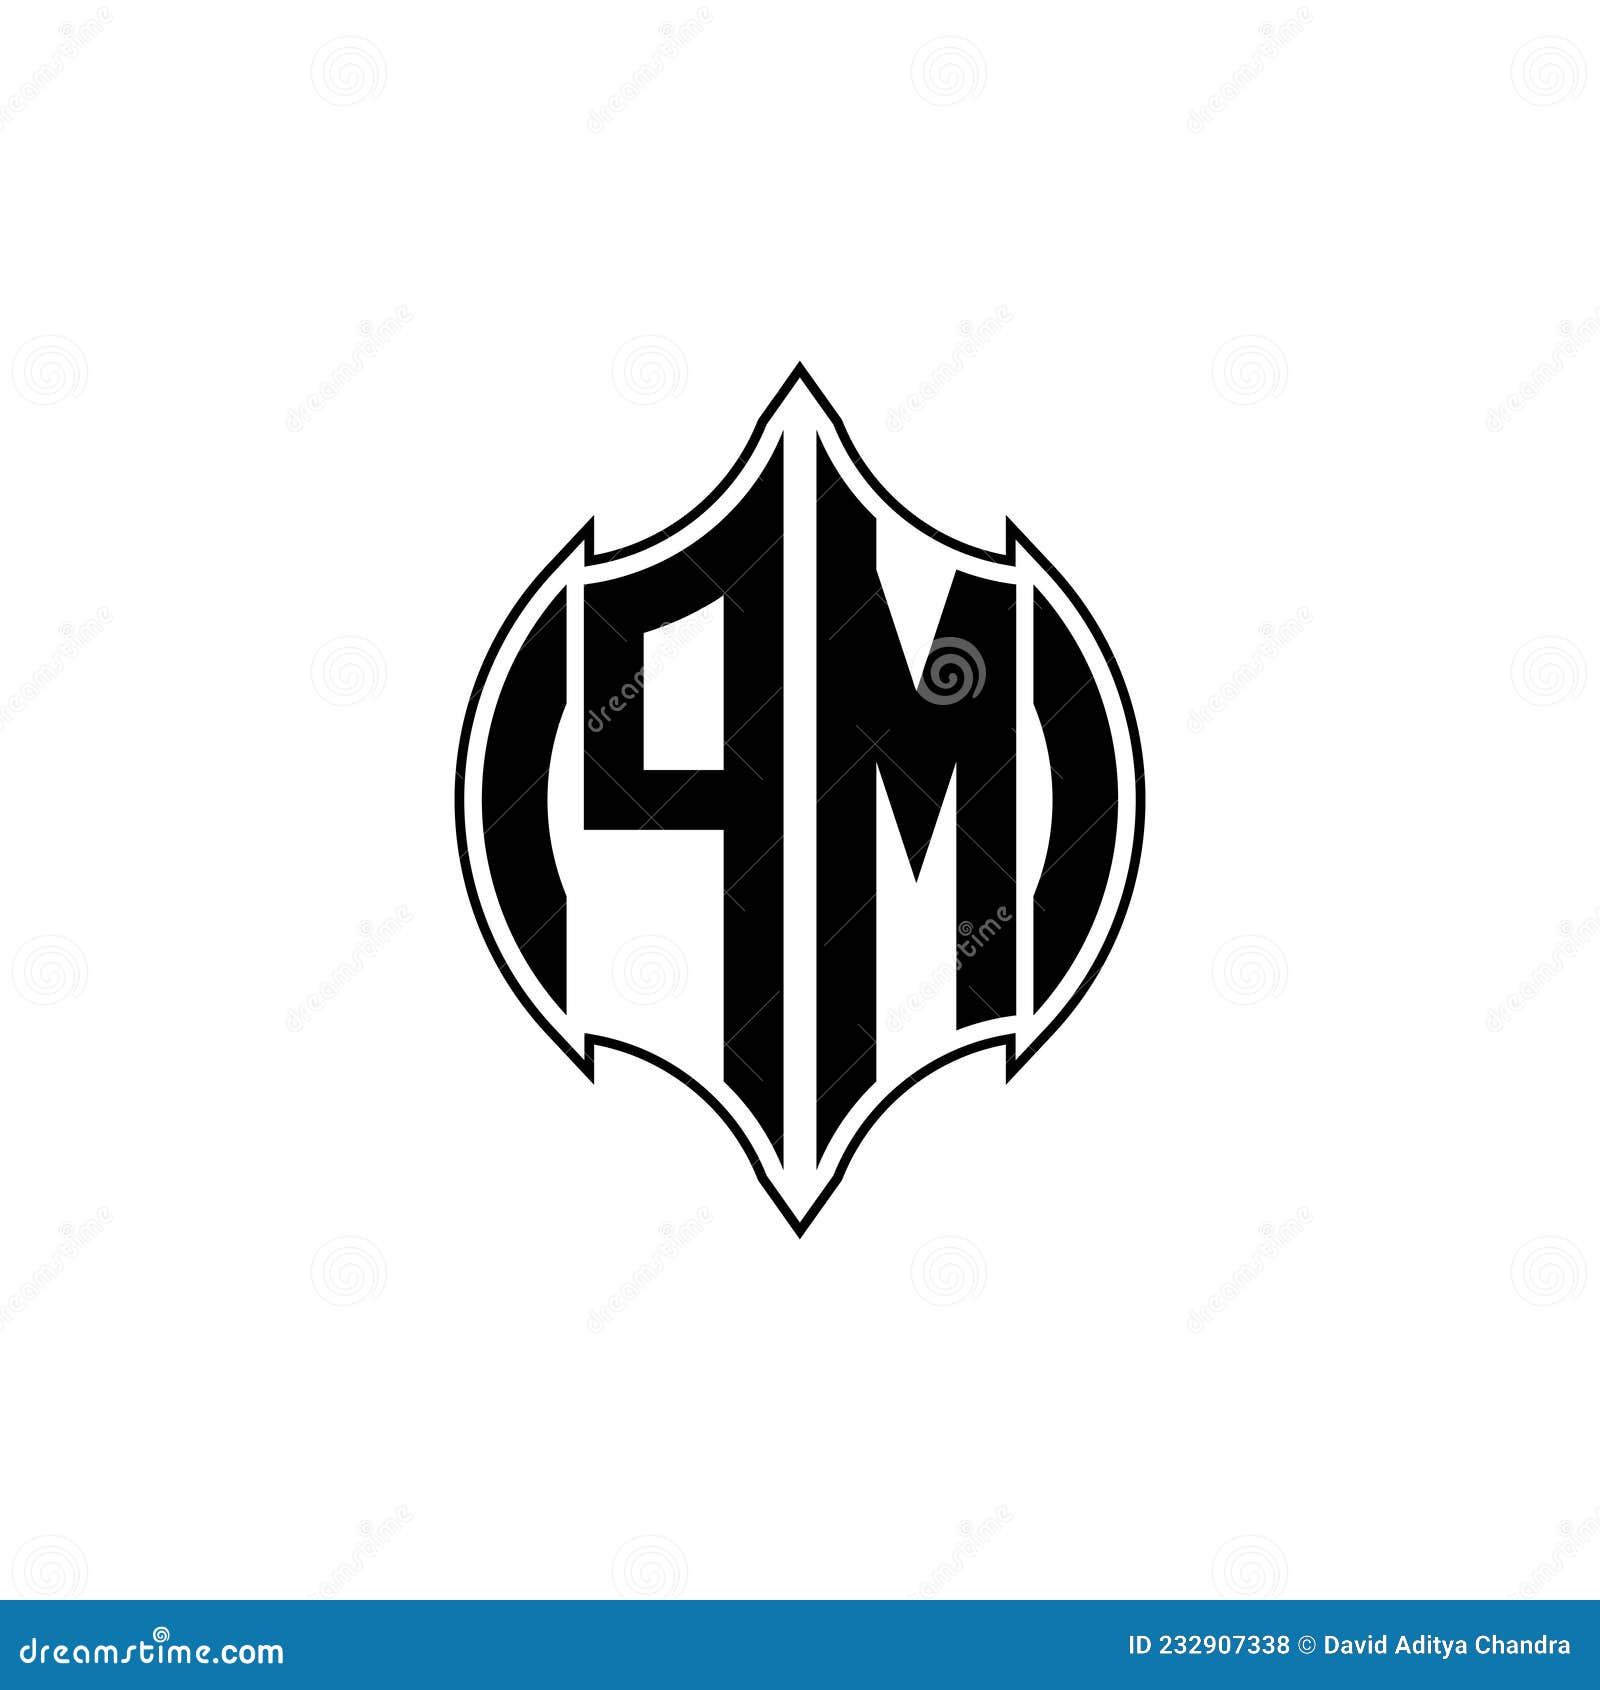 Pm monogram logo with modern shield style design Vector Image